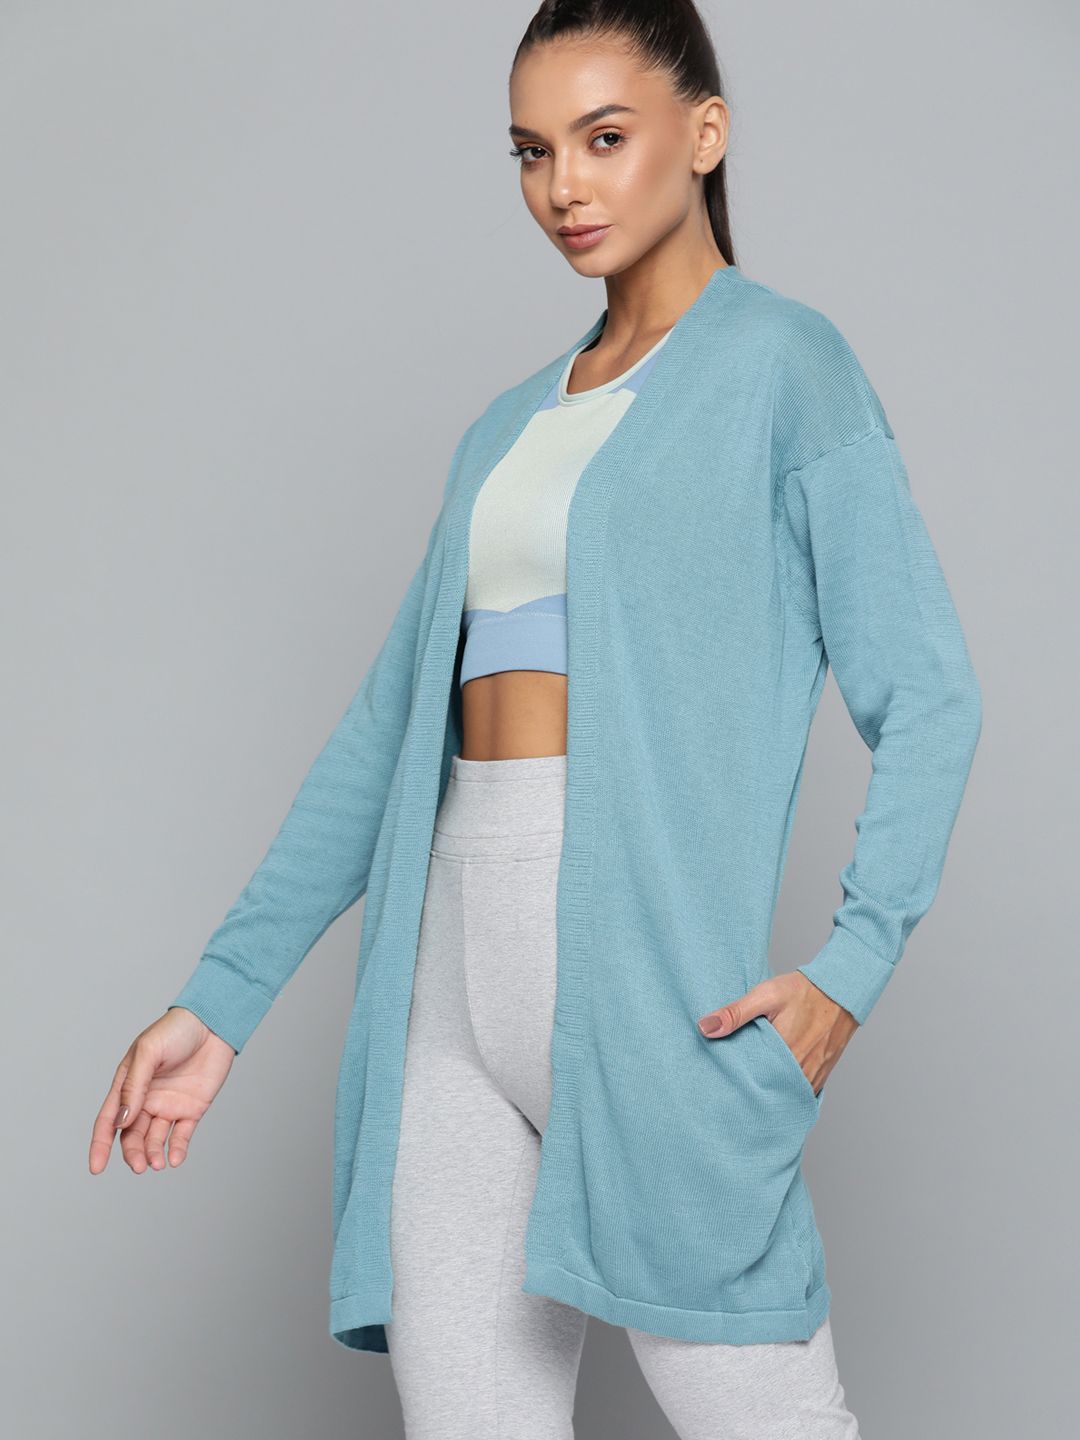 HRX By Hrithik Roshan Yoga Women Delphinium Blue Rapid-Dry Solid Sweater Price in India